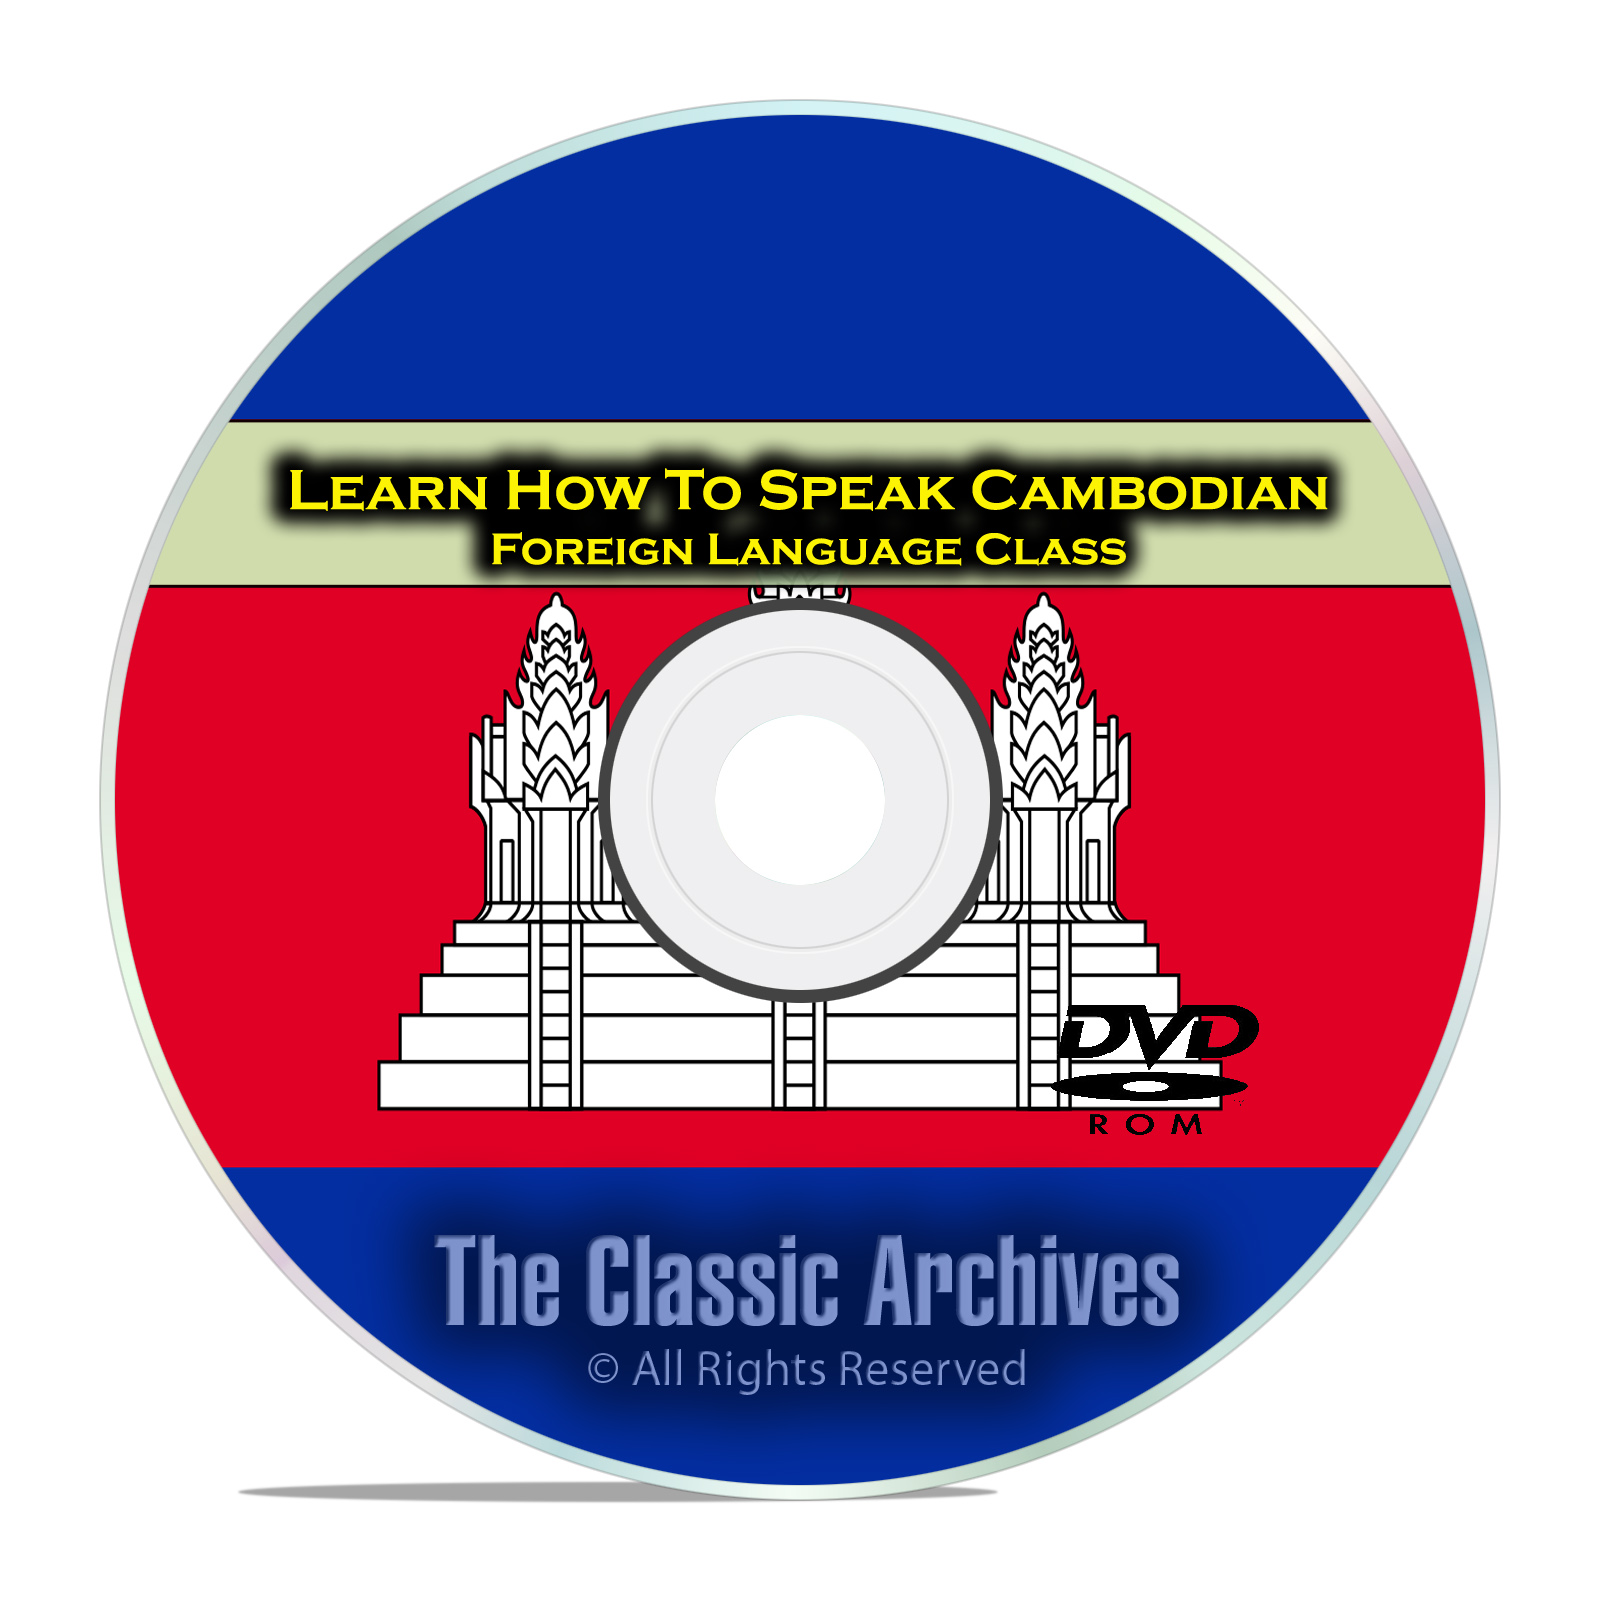 Learn How To Speak Cambodian, Fast Foreign Language Training Course, DVD